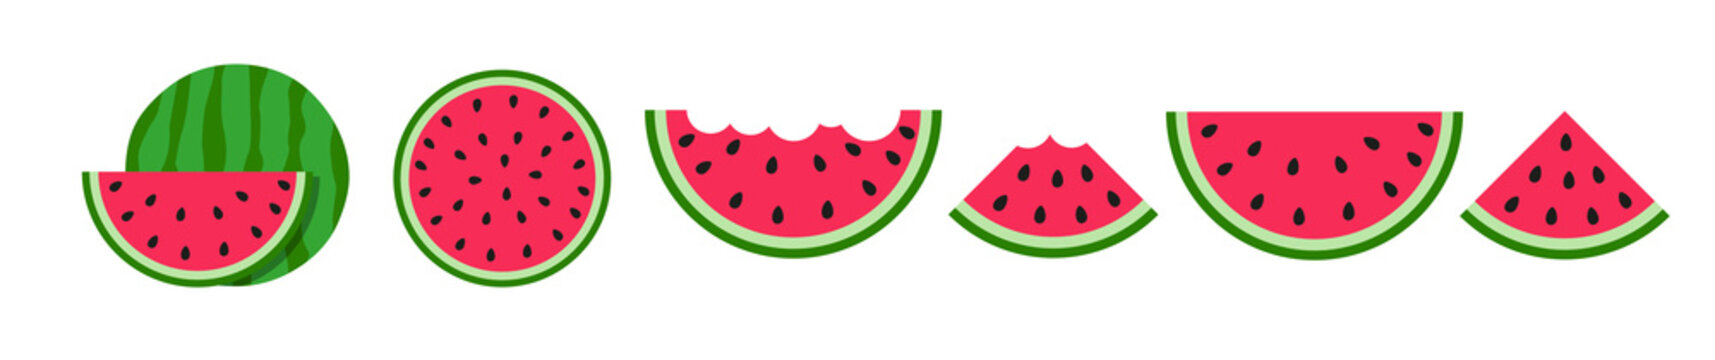 Fresh and juicy watermelons and slices icon